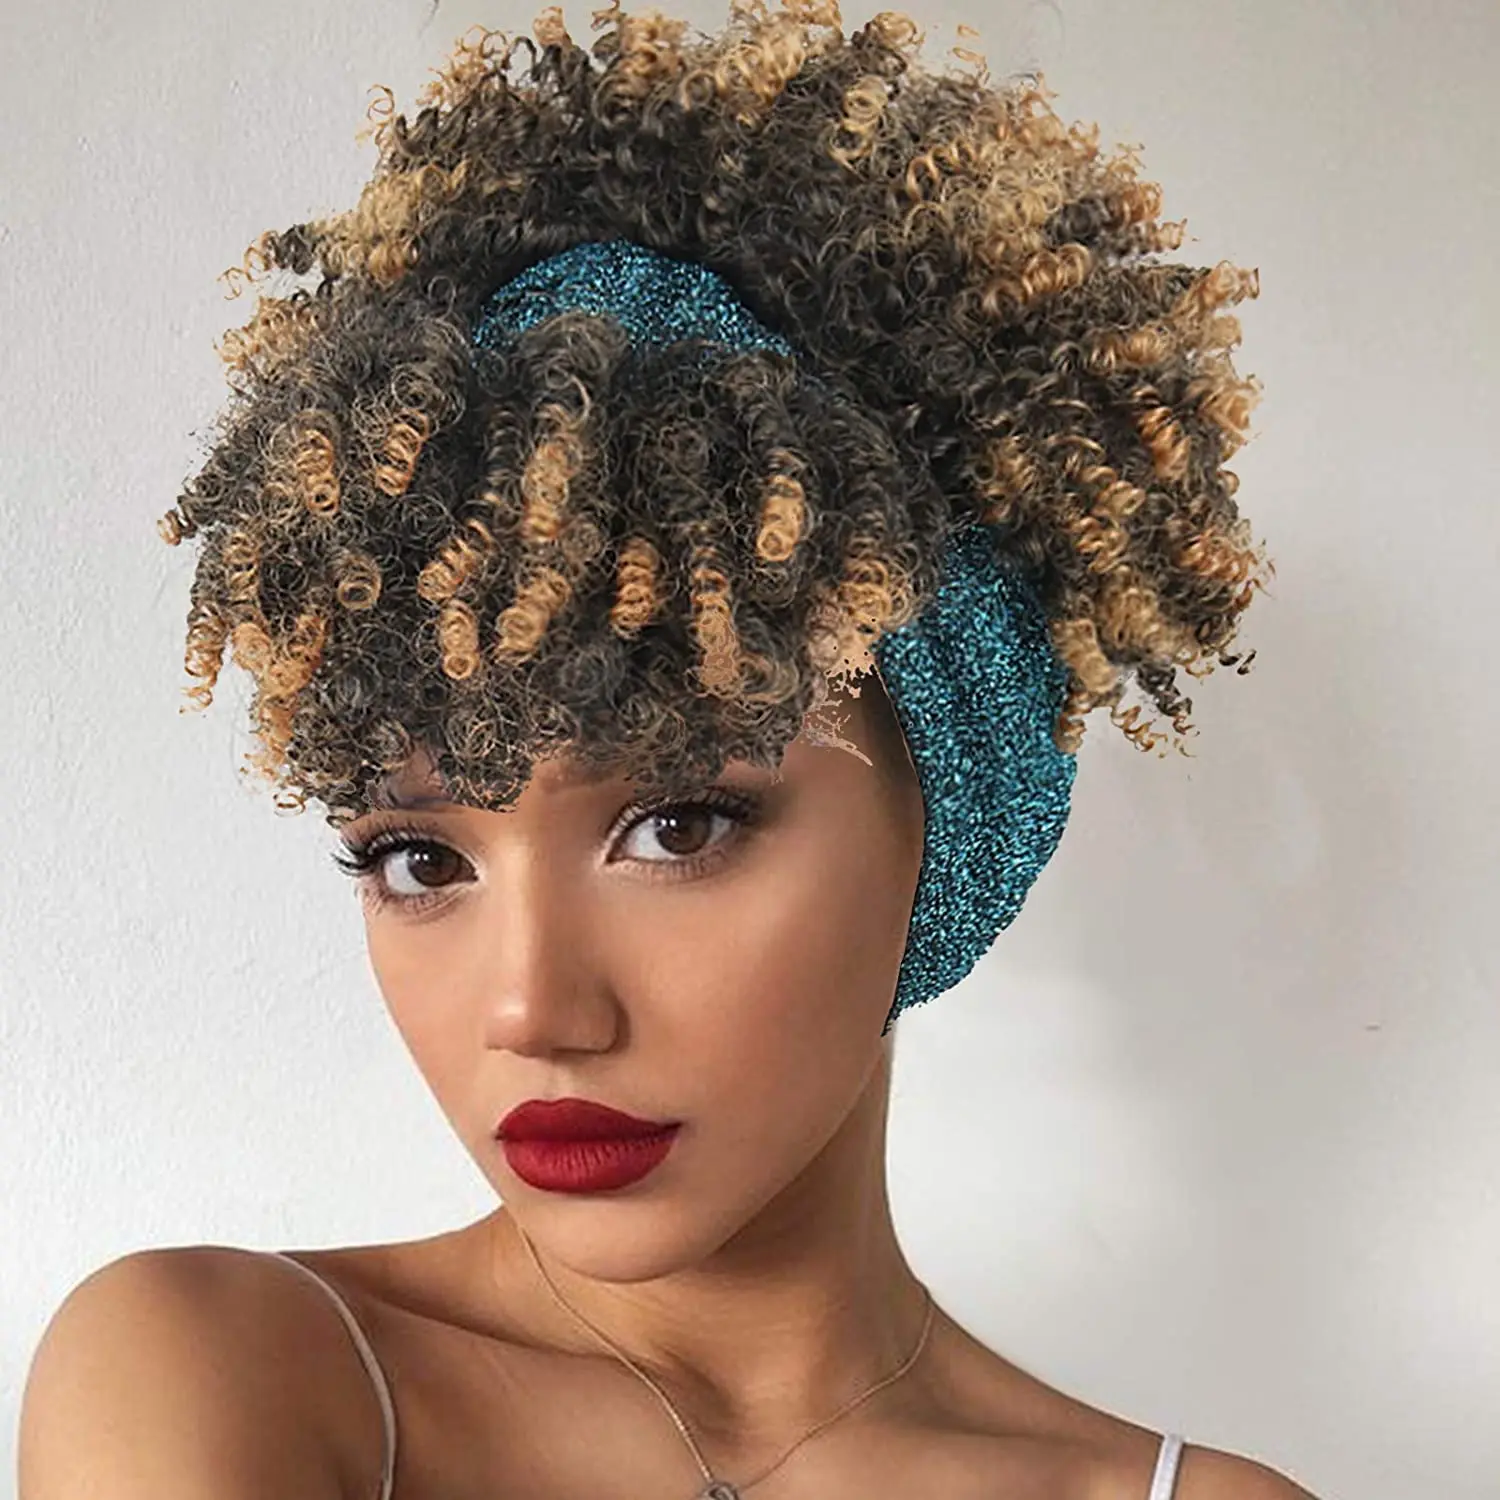 

Hot Selling Kinky Curly Headband Wigs for Black Women Synthetic Wig Short Afro Kinky Curly Wigs with Bangs Natural Looking